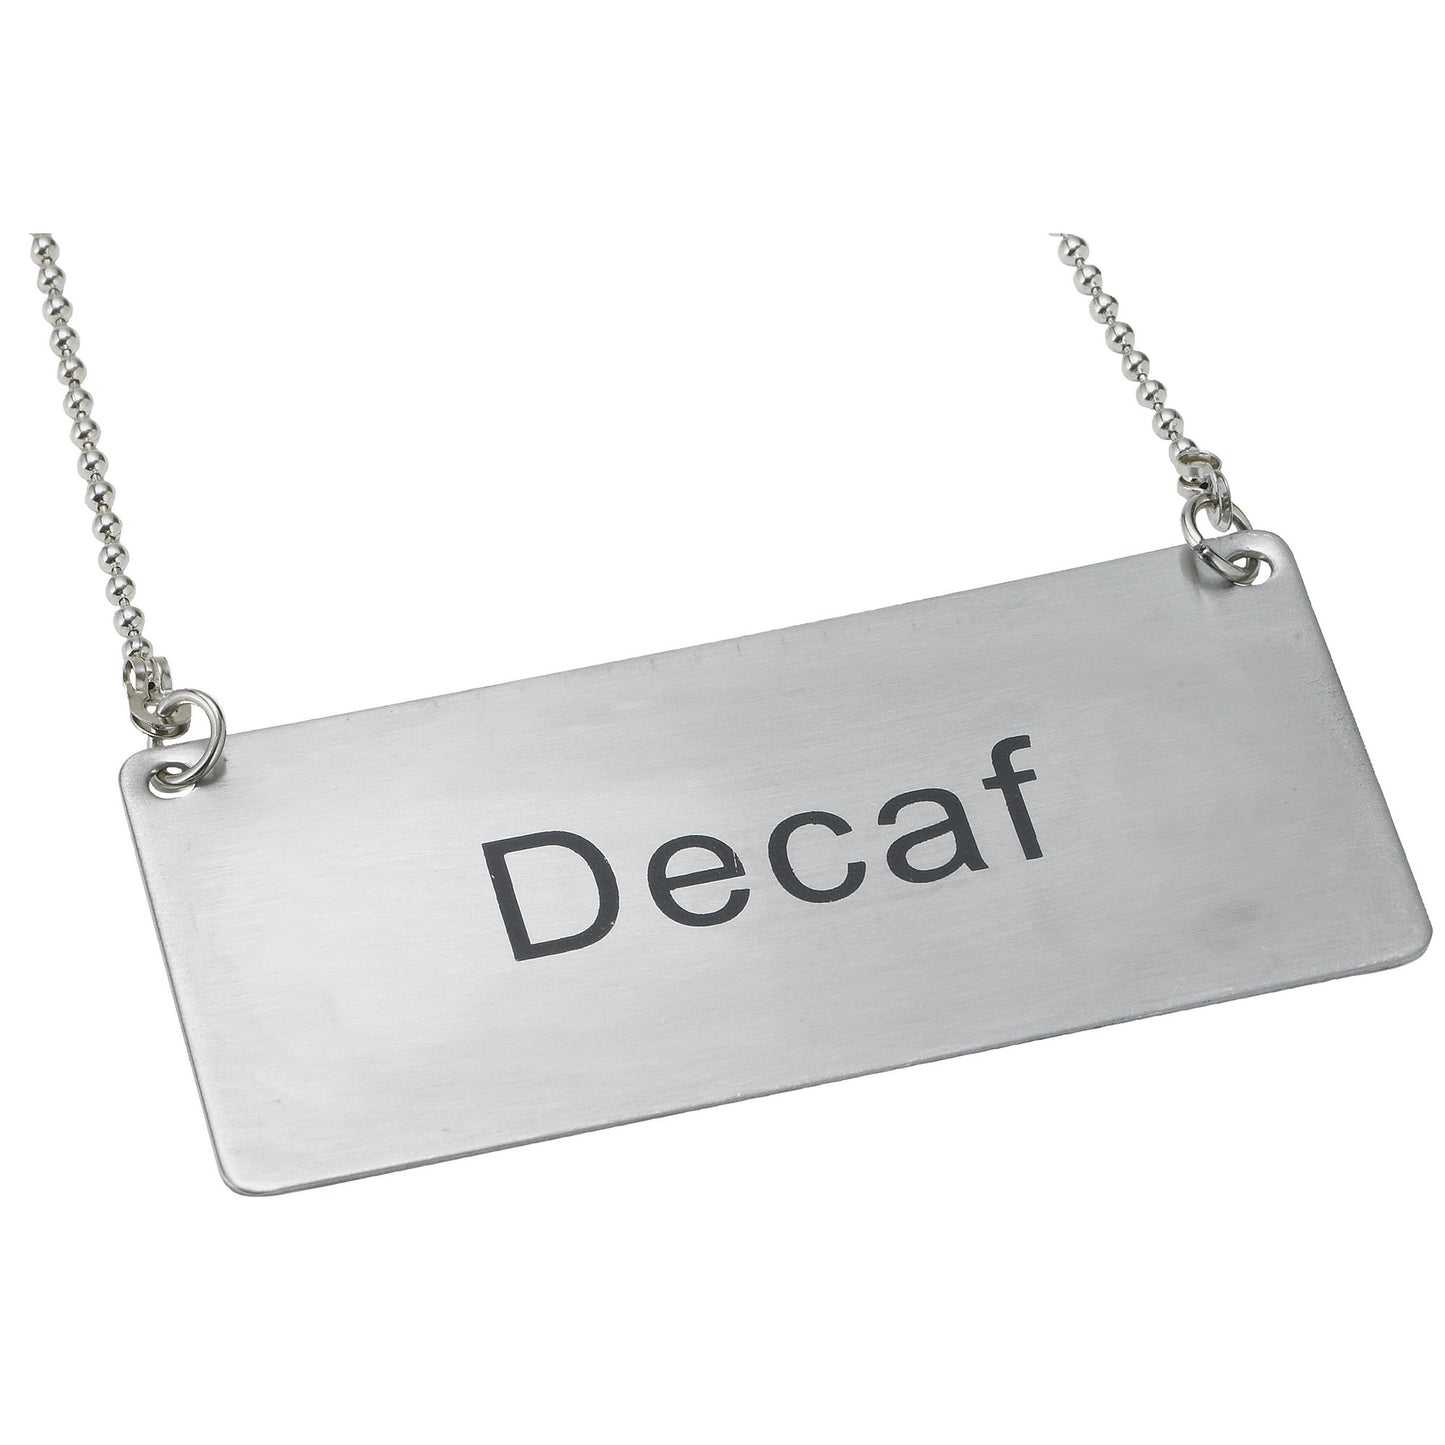 SGN-202 - Chain Sign, Stainless Steel - Decaf